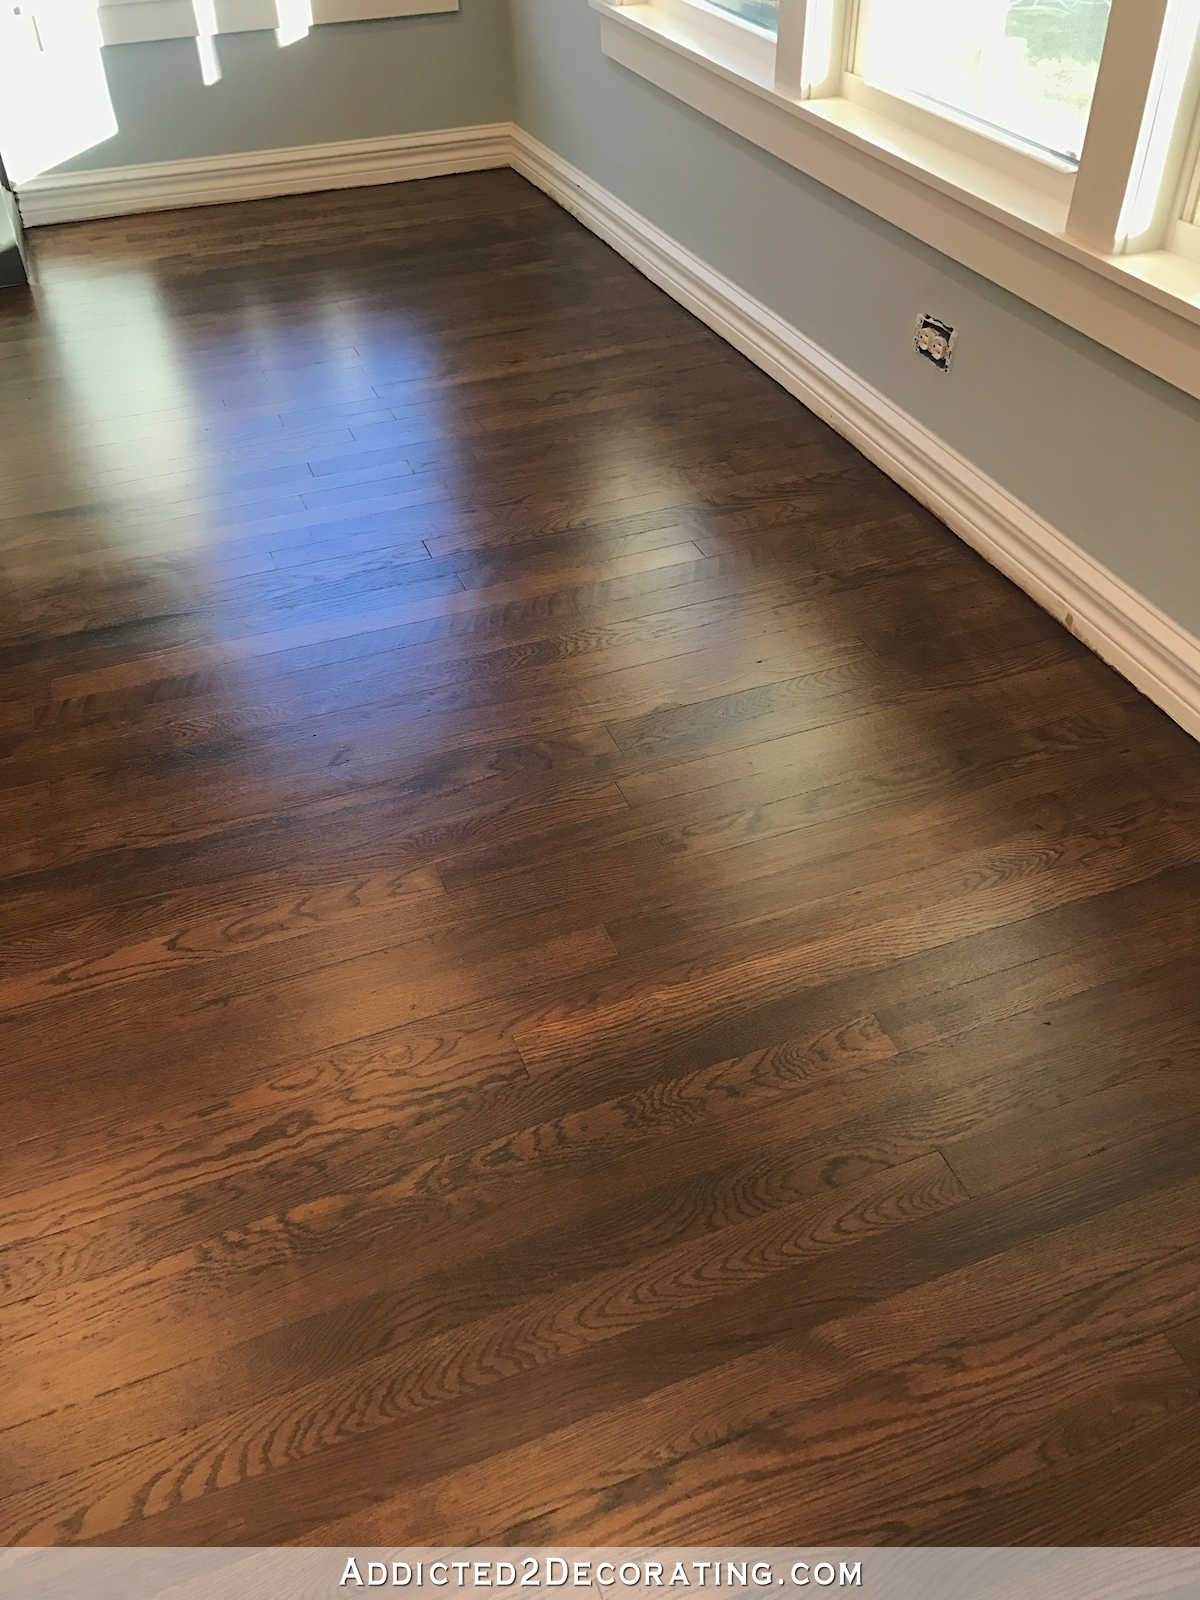 refinished red oak hardwood floors - living room by the windows